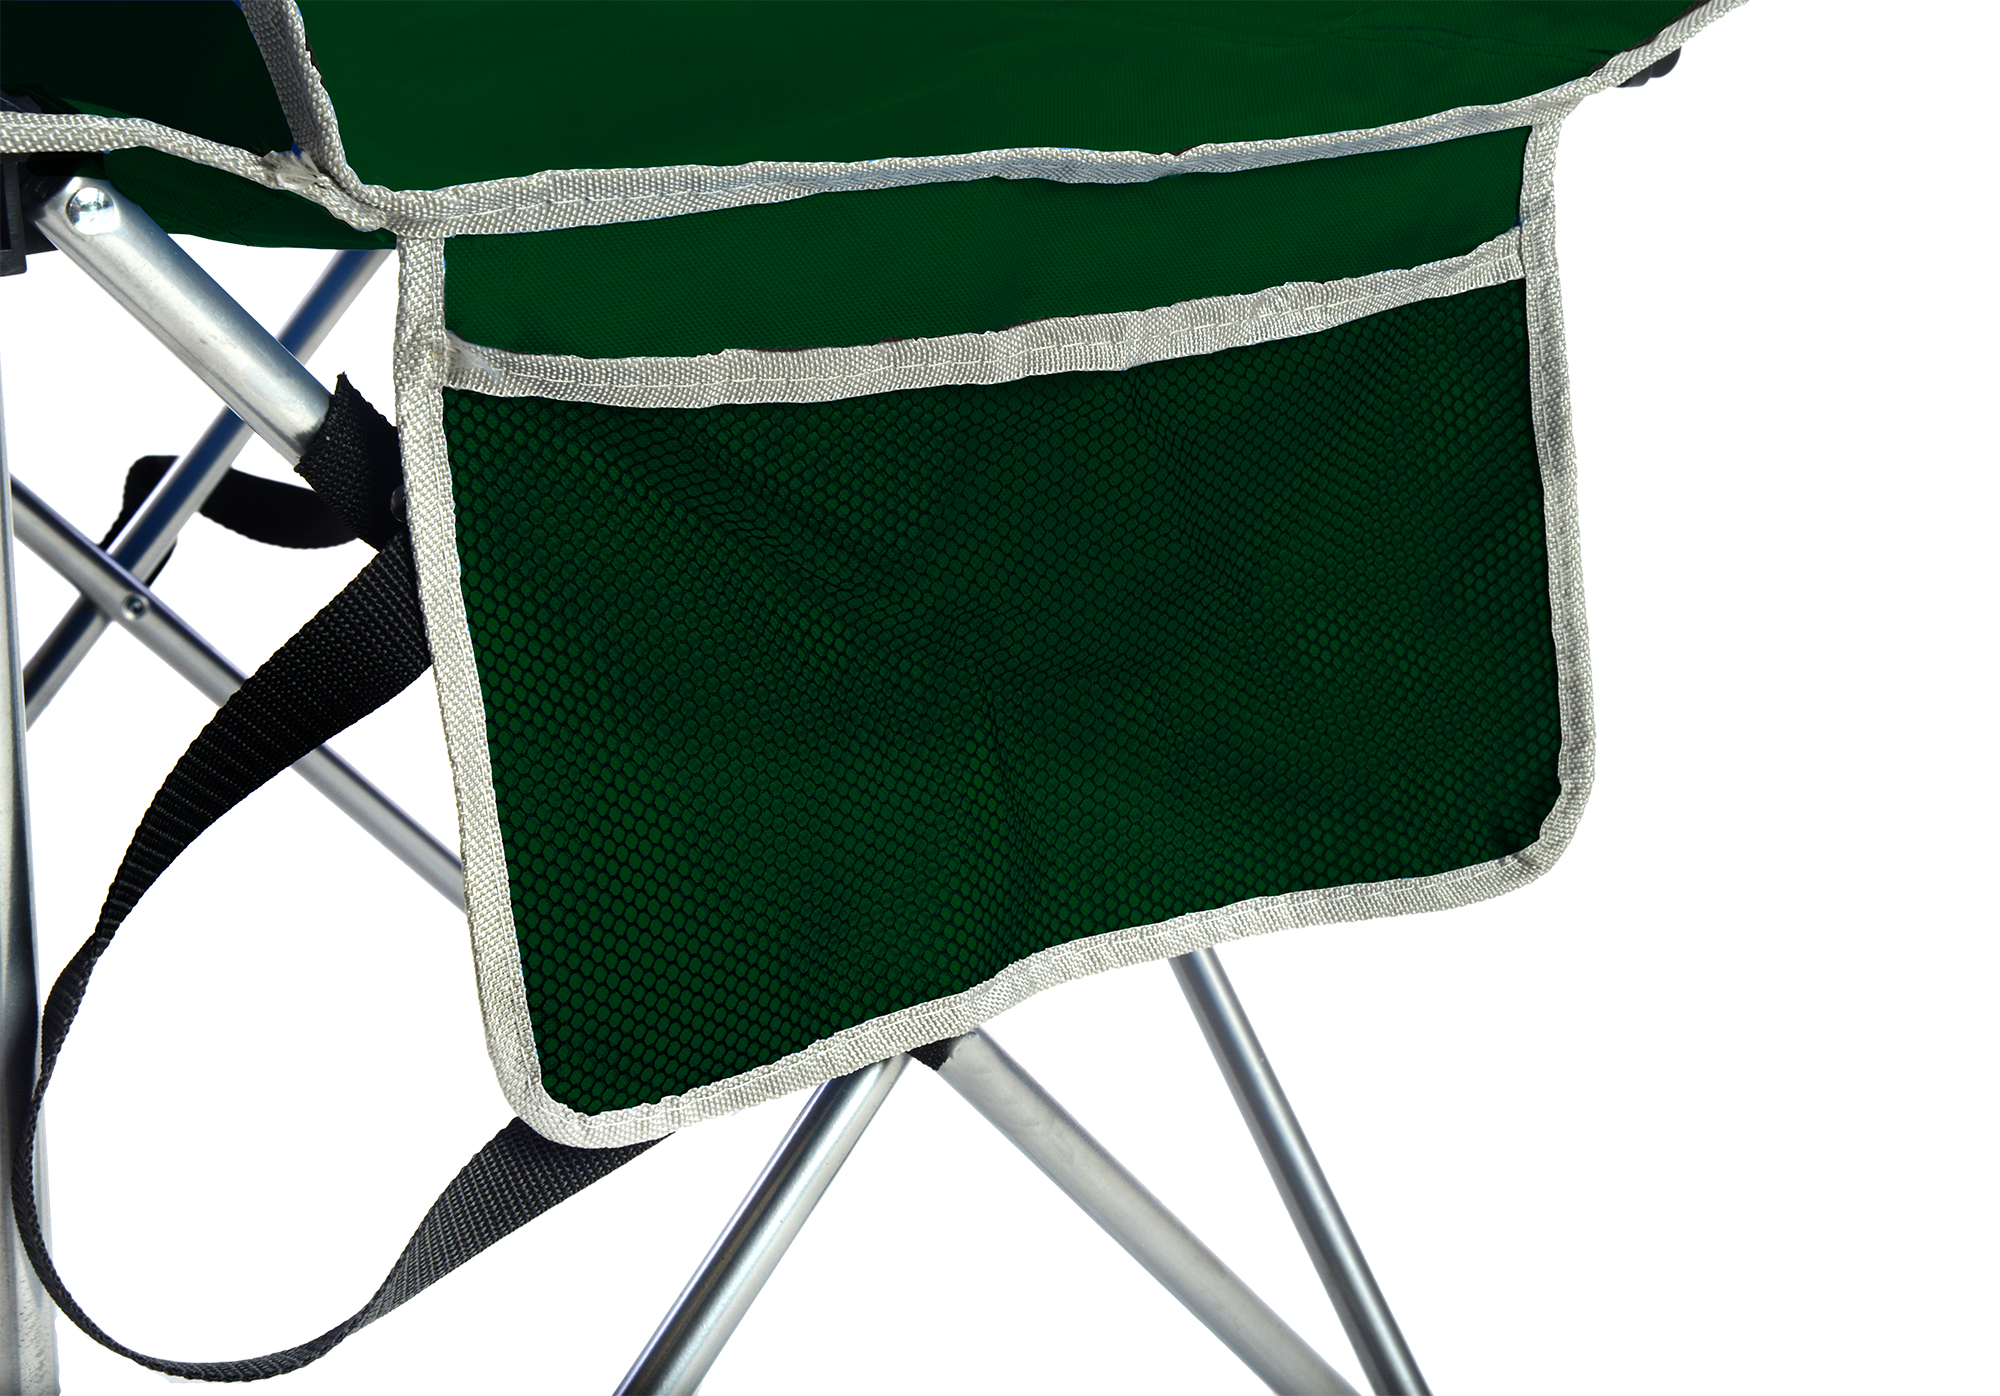 Quik Shade Full Size Folding Chair, Forest Green, Lawn Chairs - image 4 of 5